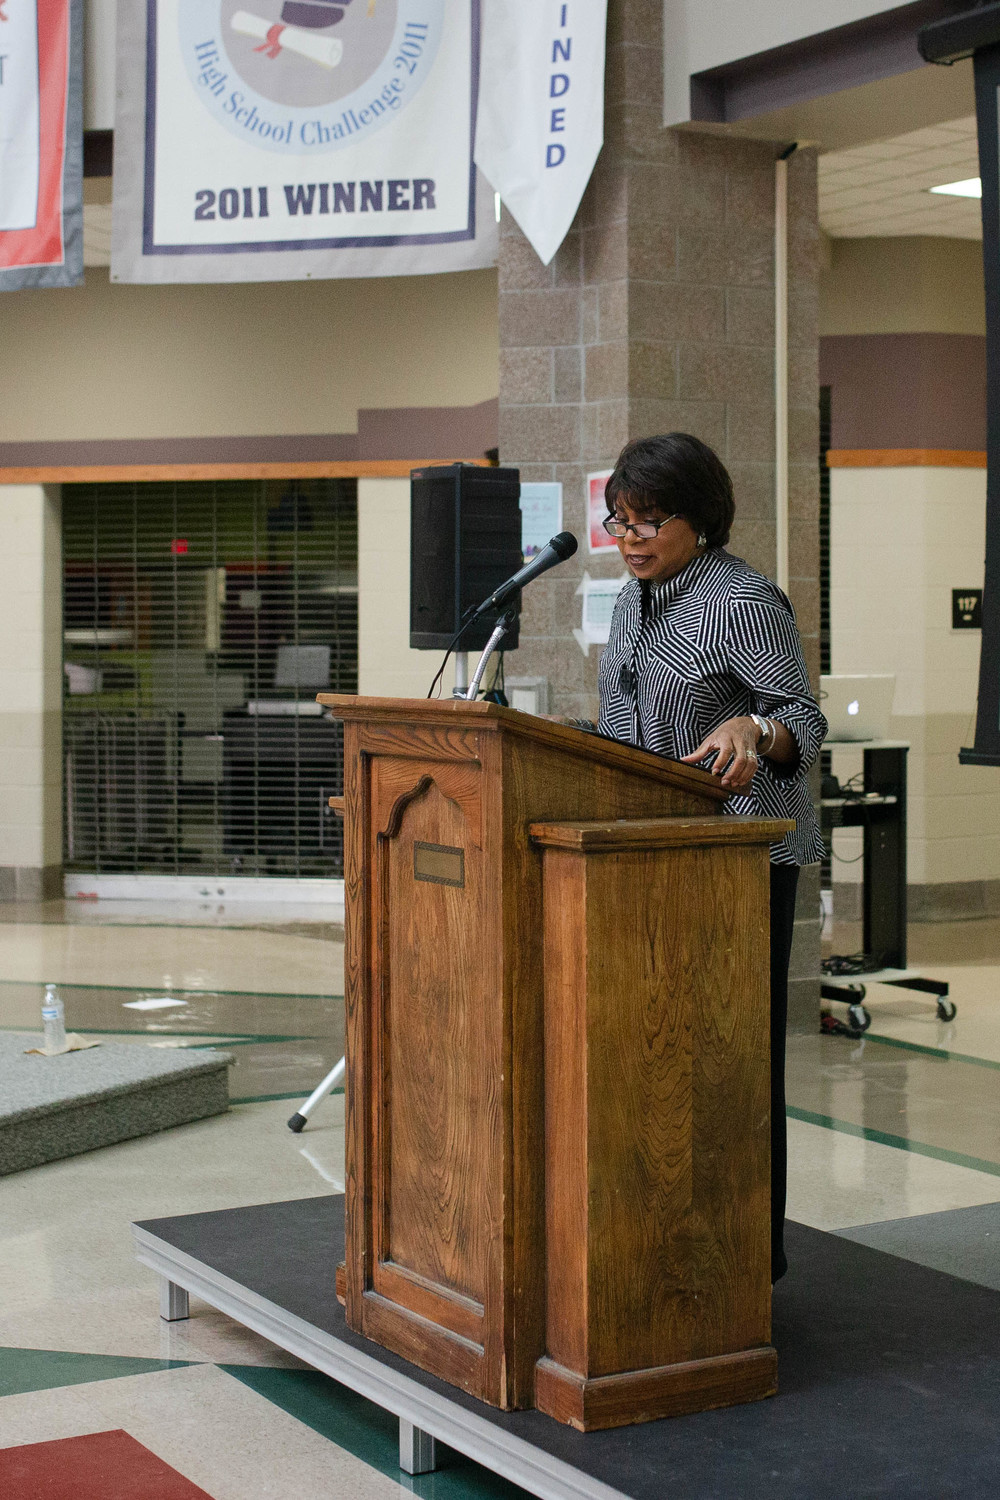 Brown v. Board of Education
Cheryl Brown Henderson, the youngest of the late Rev. Oliver Brown’s three daughters, speaks during a celebration of his 100th birthday hosted by Drury University on Aug. 19 at Central High School.